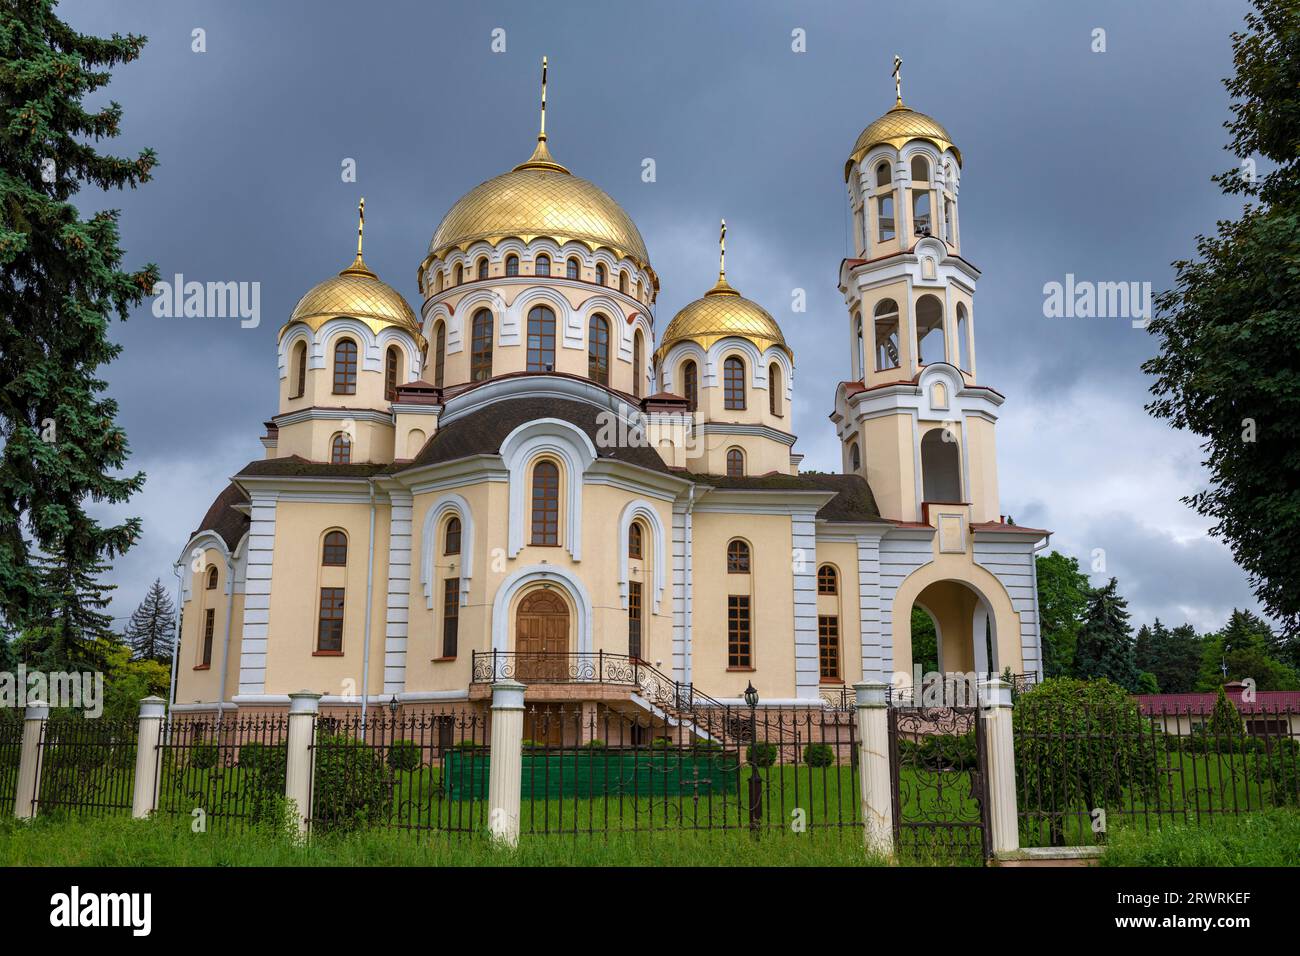 Cathedral of Mary Magdalene on a cloudy day. Nalchik, Kabardino-Balkarian Republic. Russian Federation Stock Photo